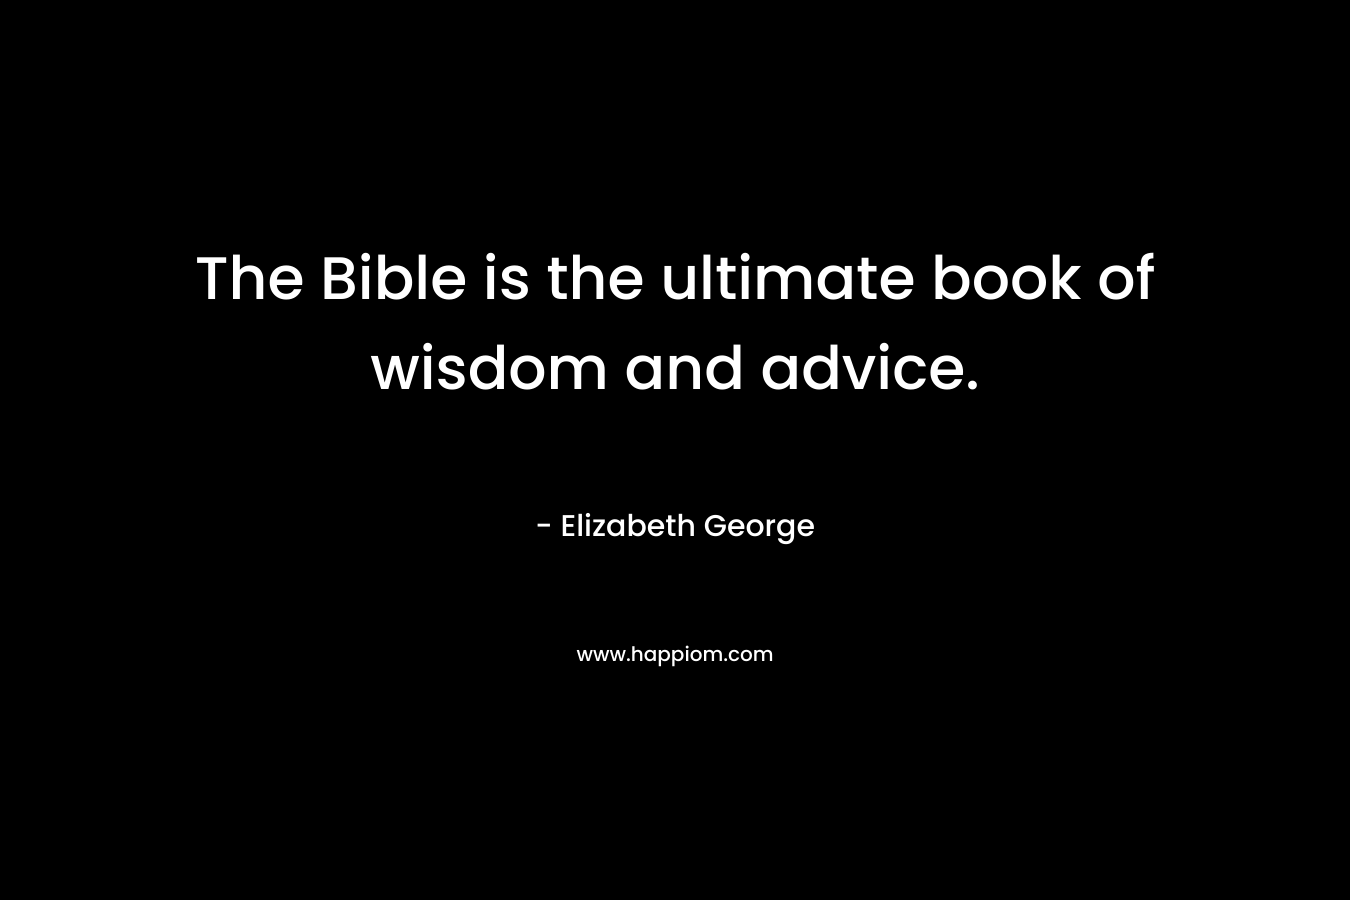 The Bible is the ultimate book of wisdom and advice.